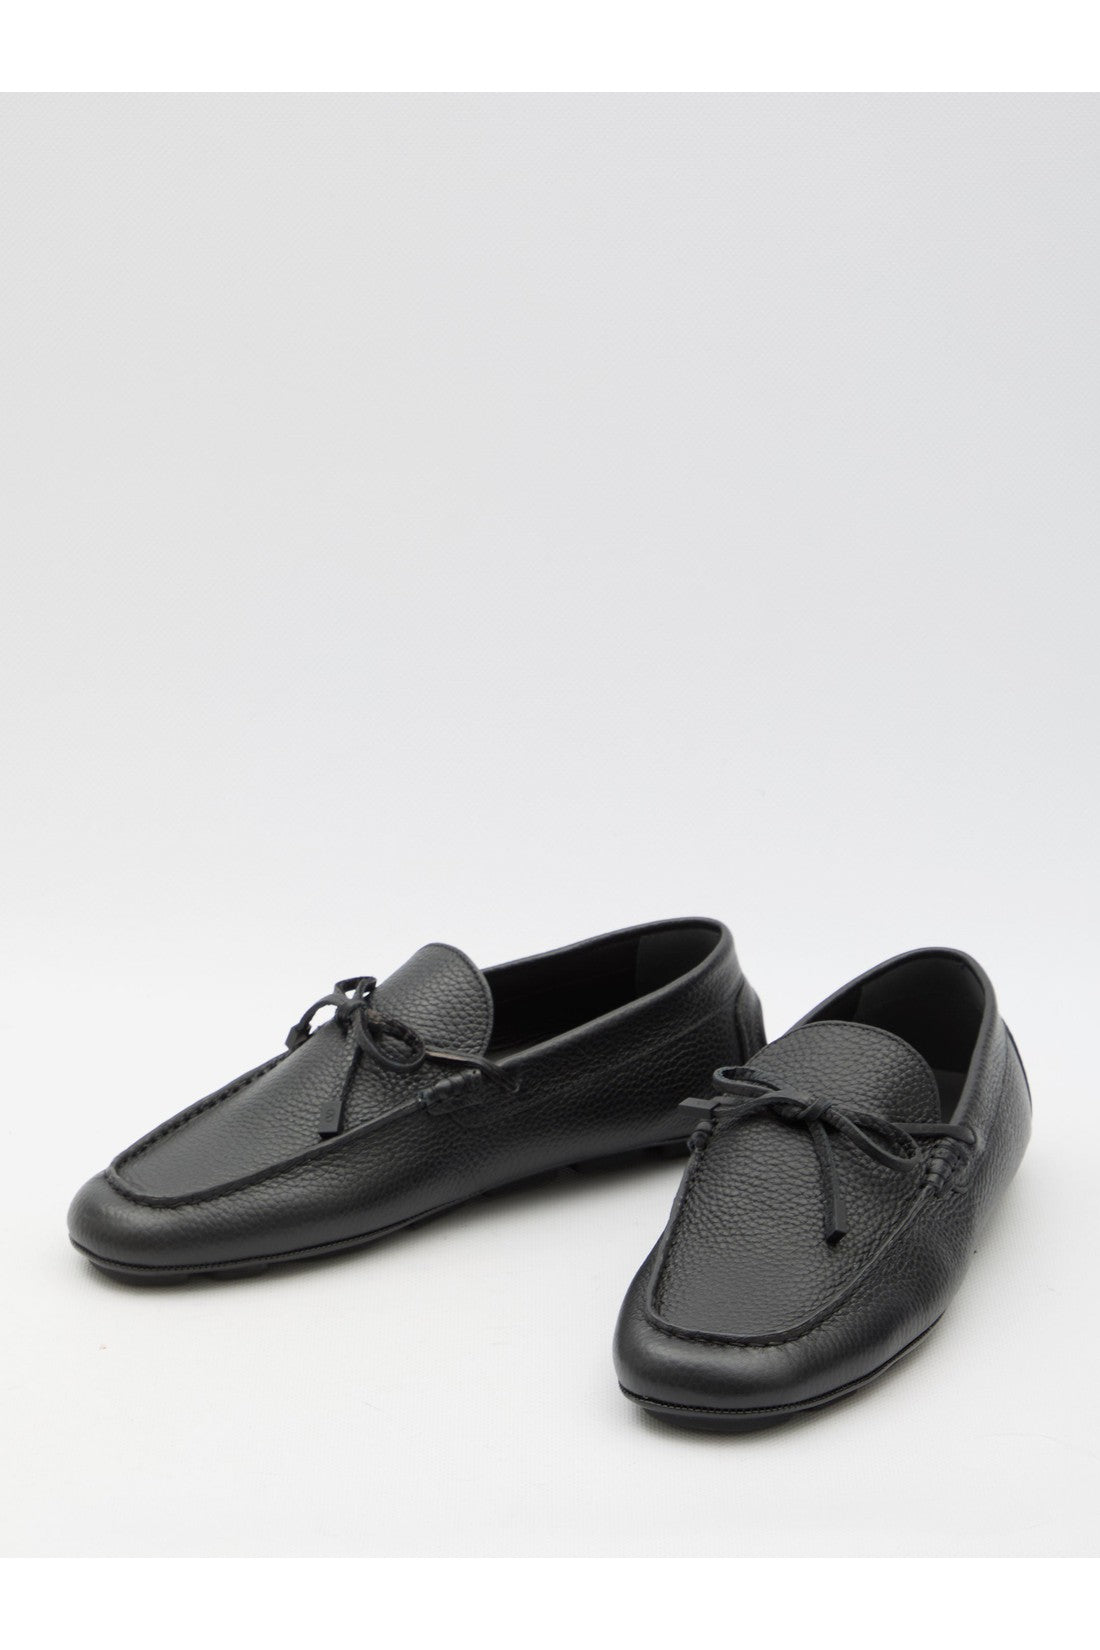 VLogo Signature Driving loafers